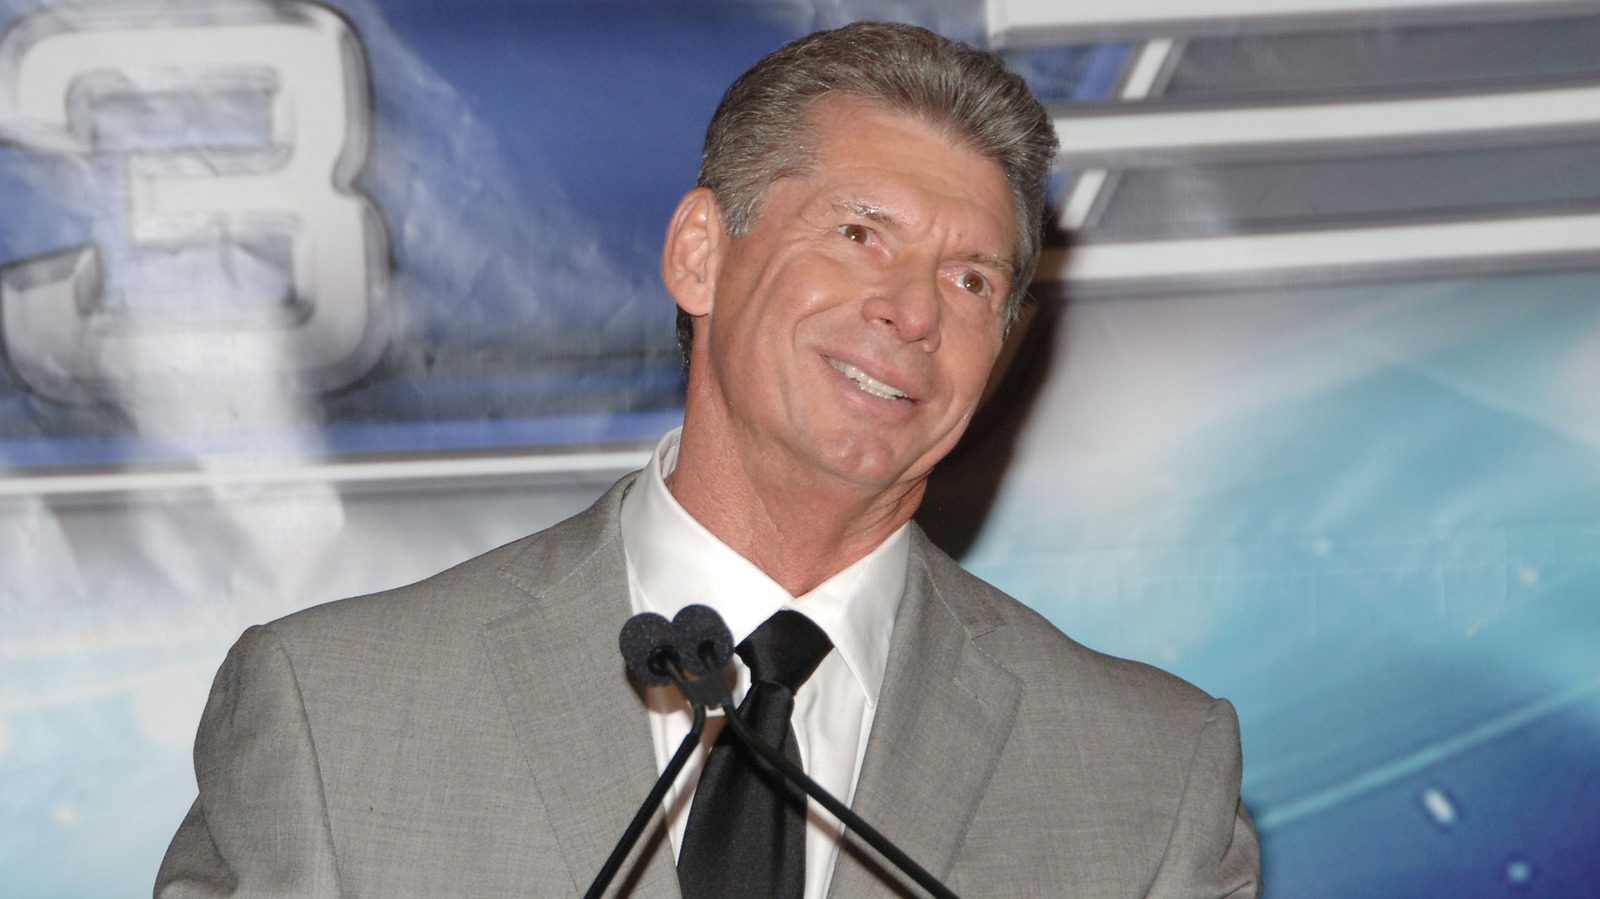 Backstage Details On Vince McMahon's Presence At All-Staff WWE Meeting